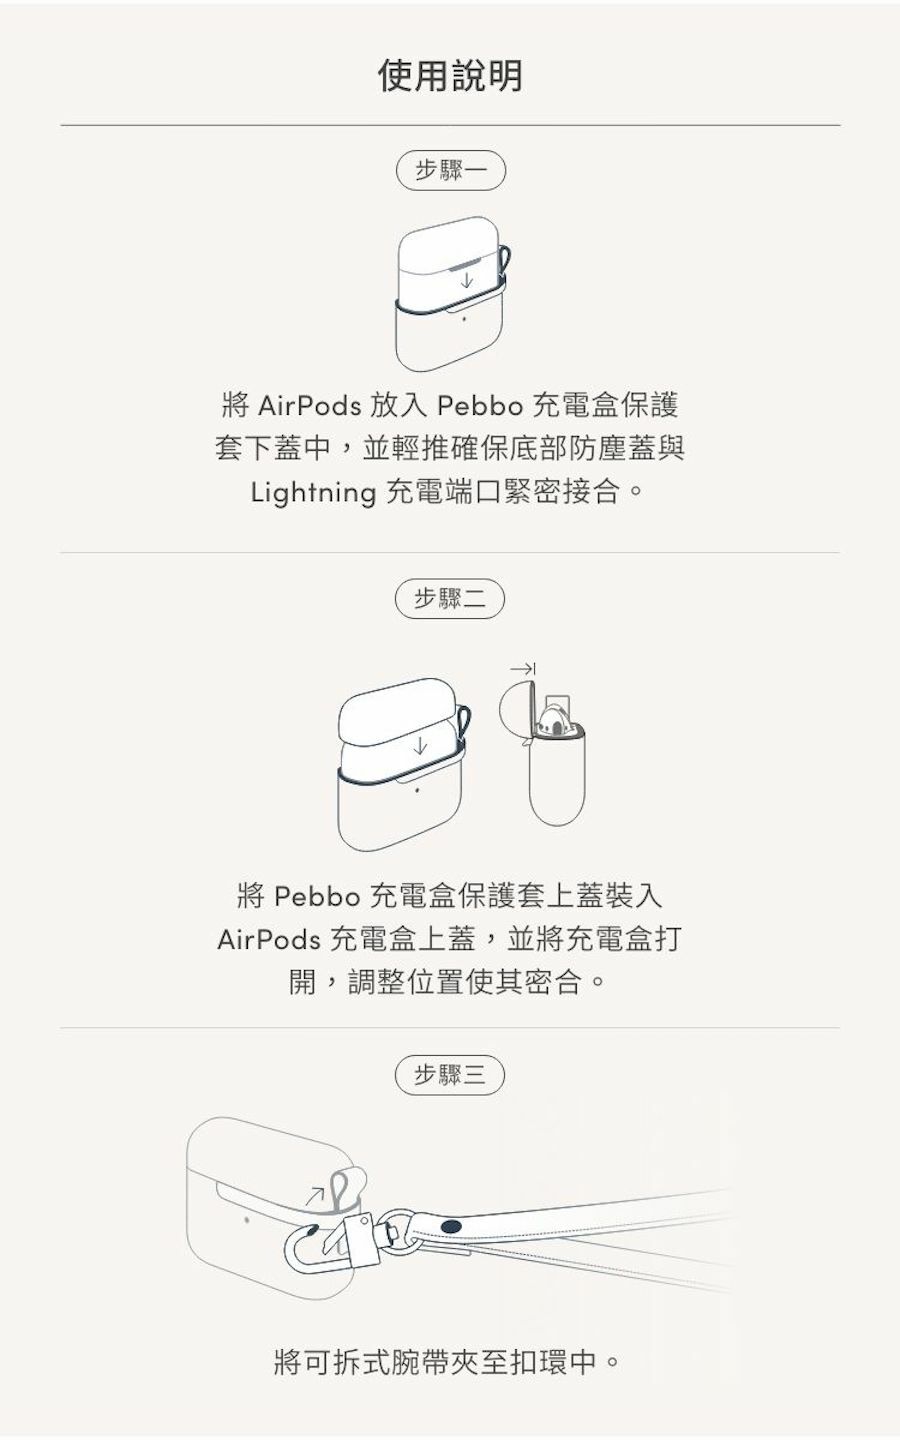 Moshi Pebbo Luxe for AirPods 3 皮革保護殼 - 商品分享